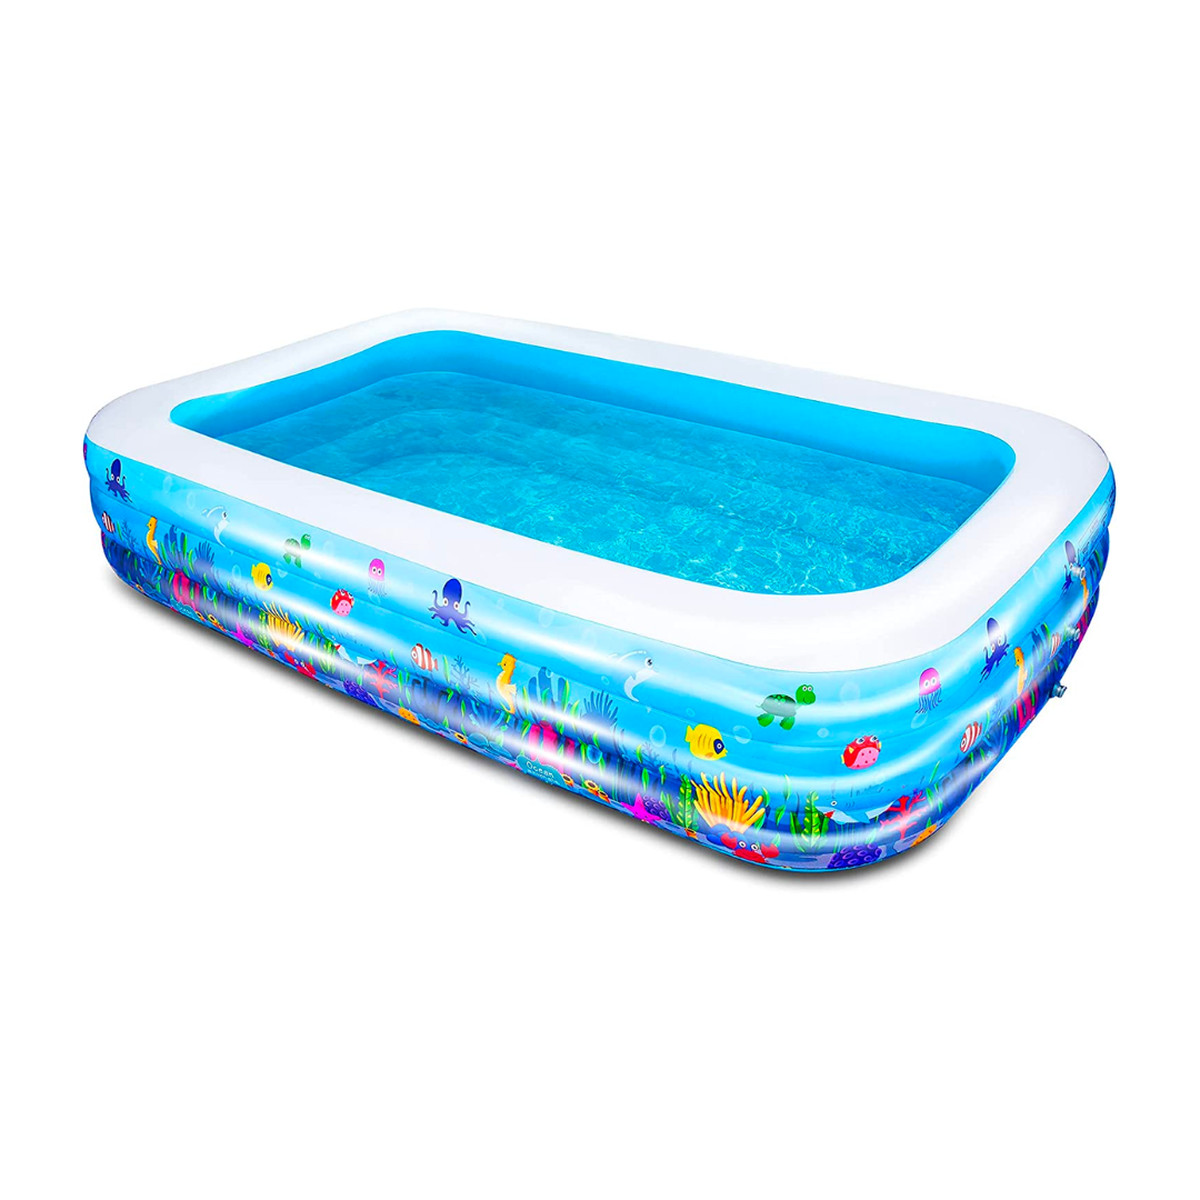 Blue and white ocean-themed AsterOutdor inflatable swimming pool